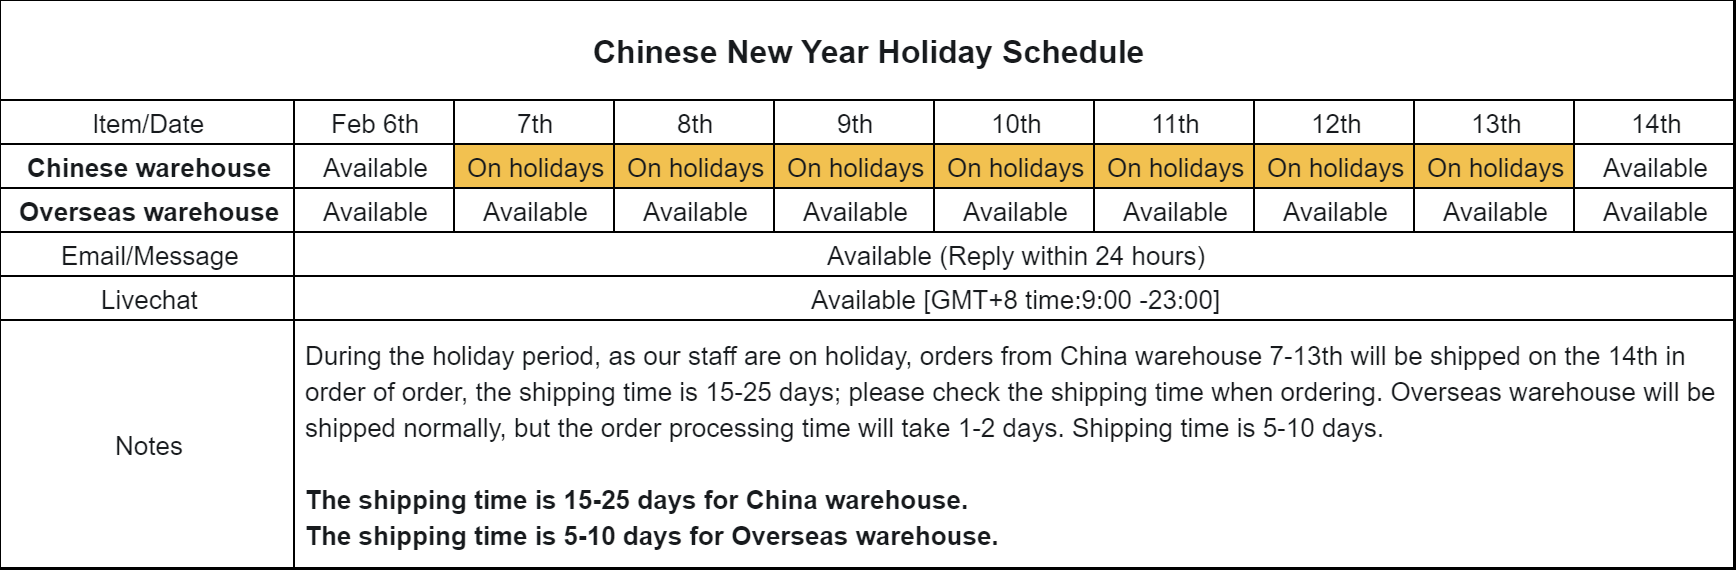 Chinese New Year Holiday Schedule